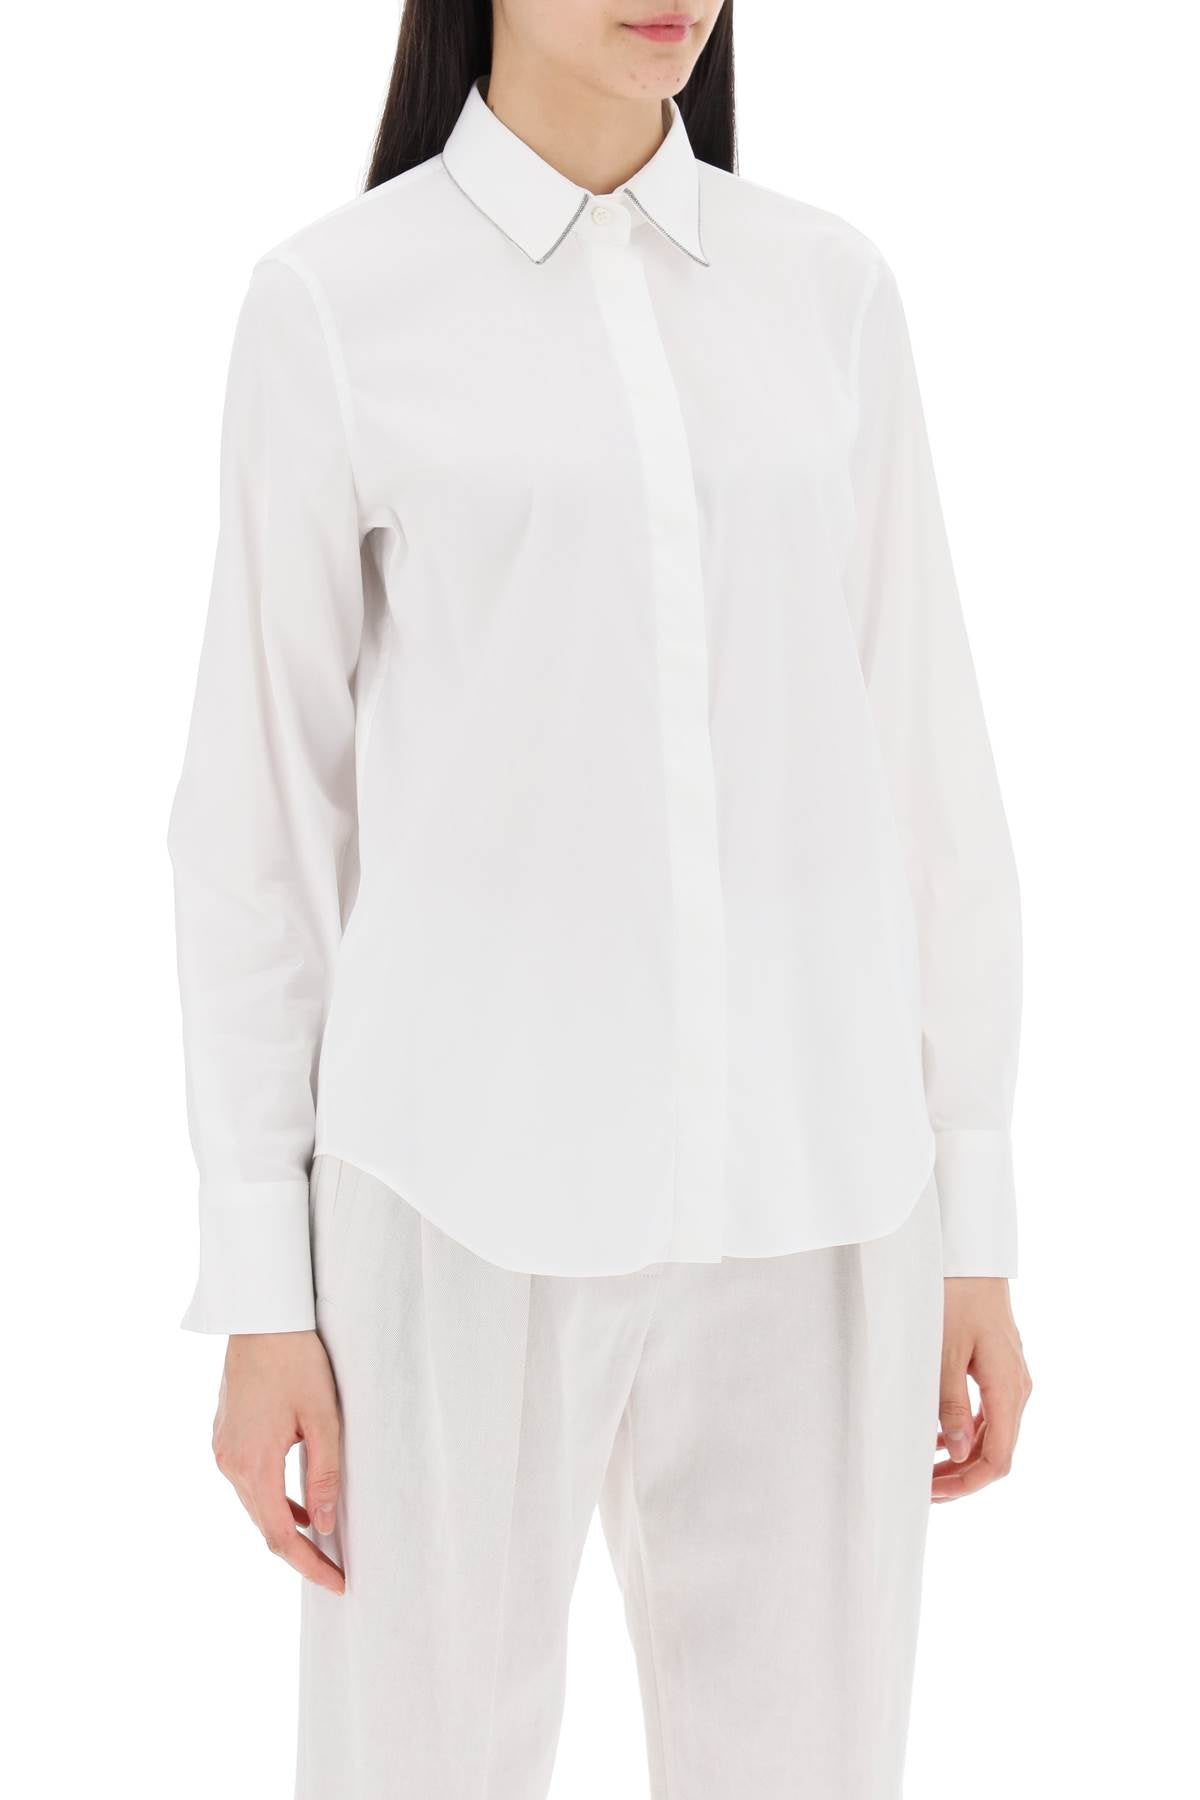 Brunello cucinelli "shirt with shiny-1